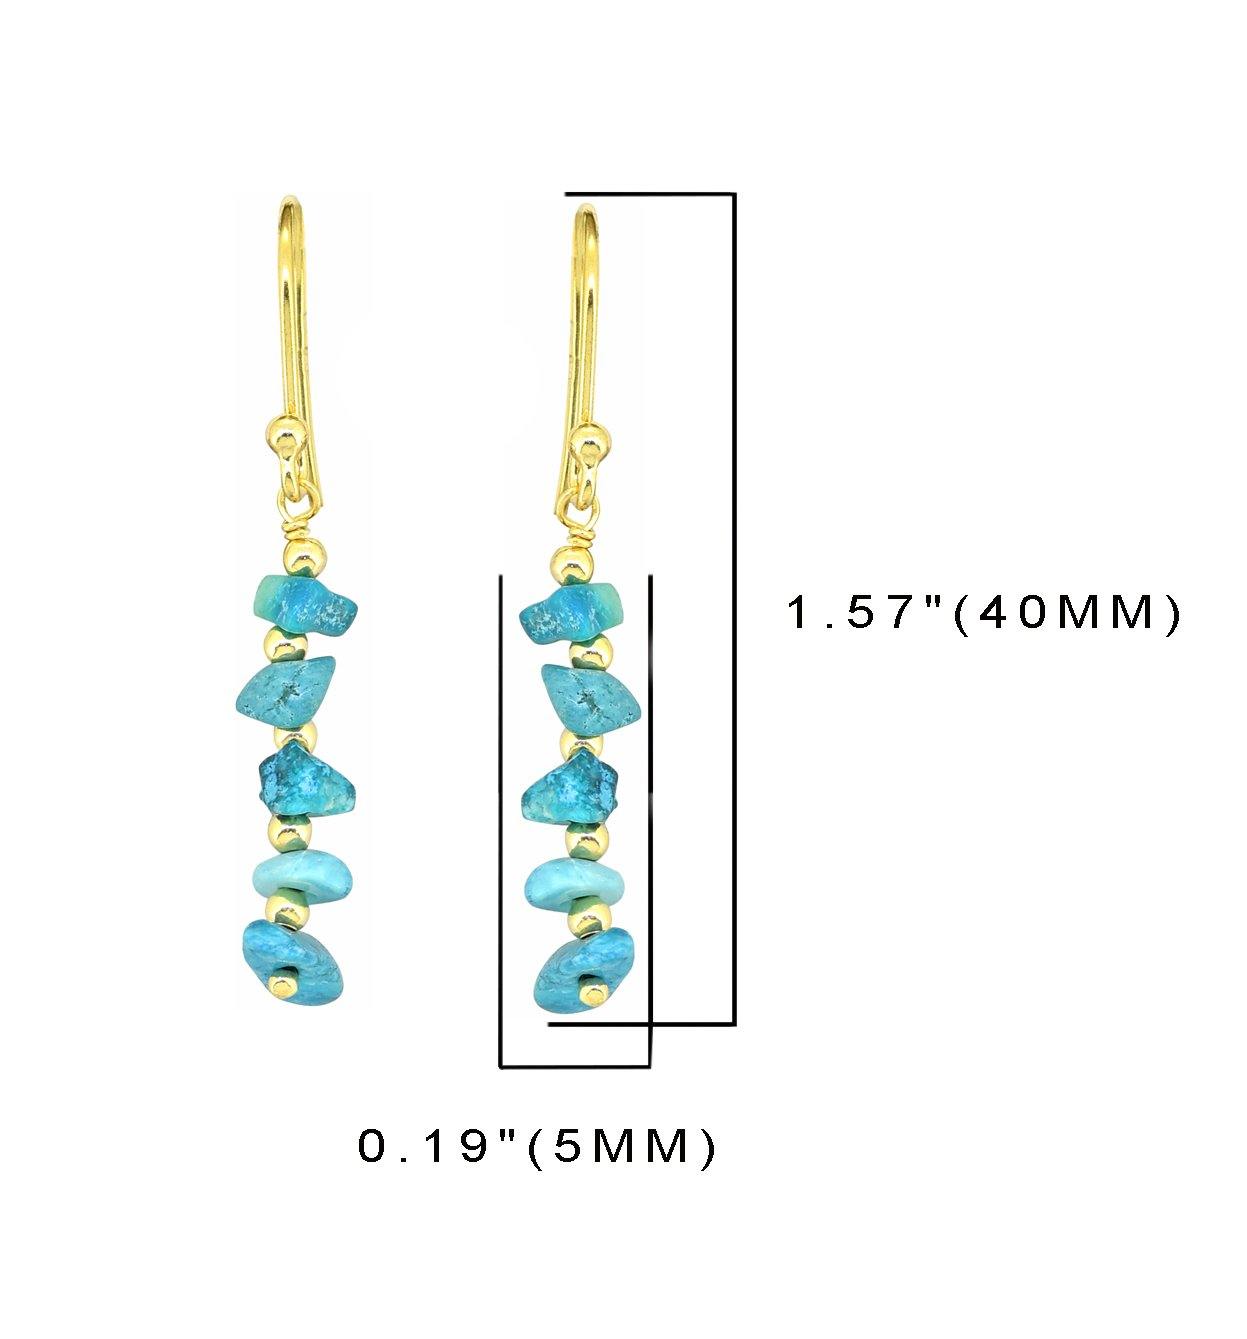 Turquoise Solid 925 Silver Gold Plated Dangle Earrings Jewelry - YoTreasure